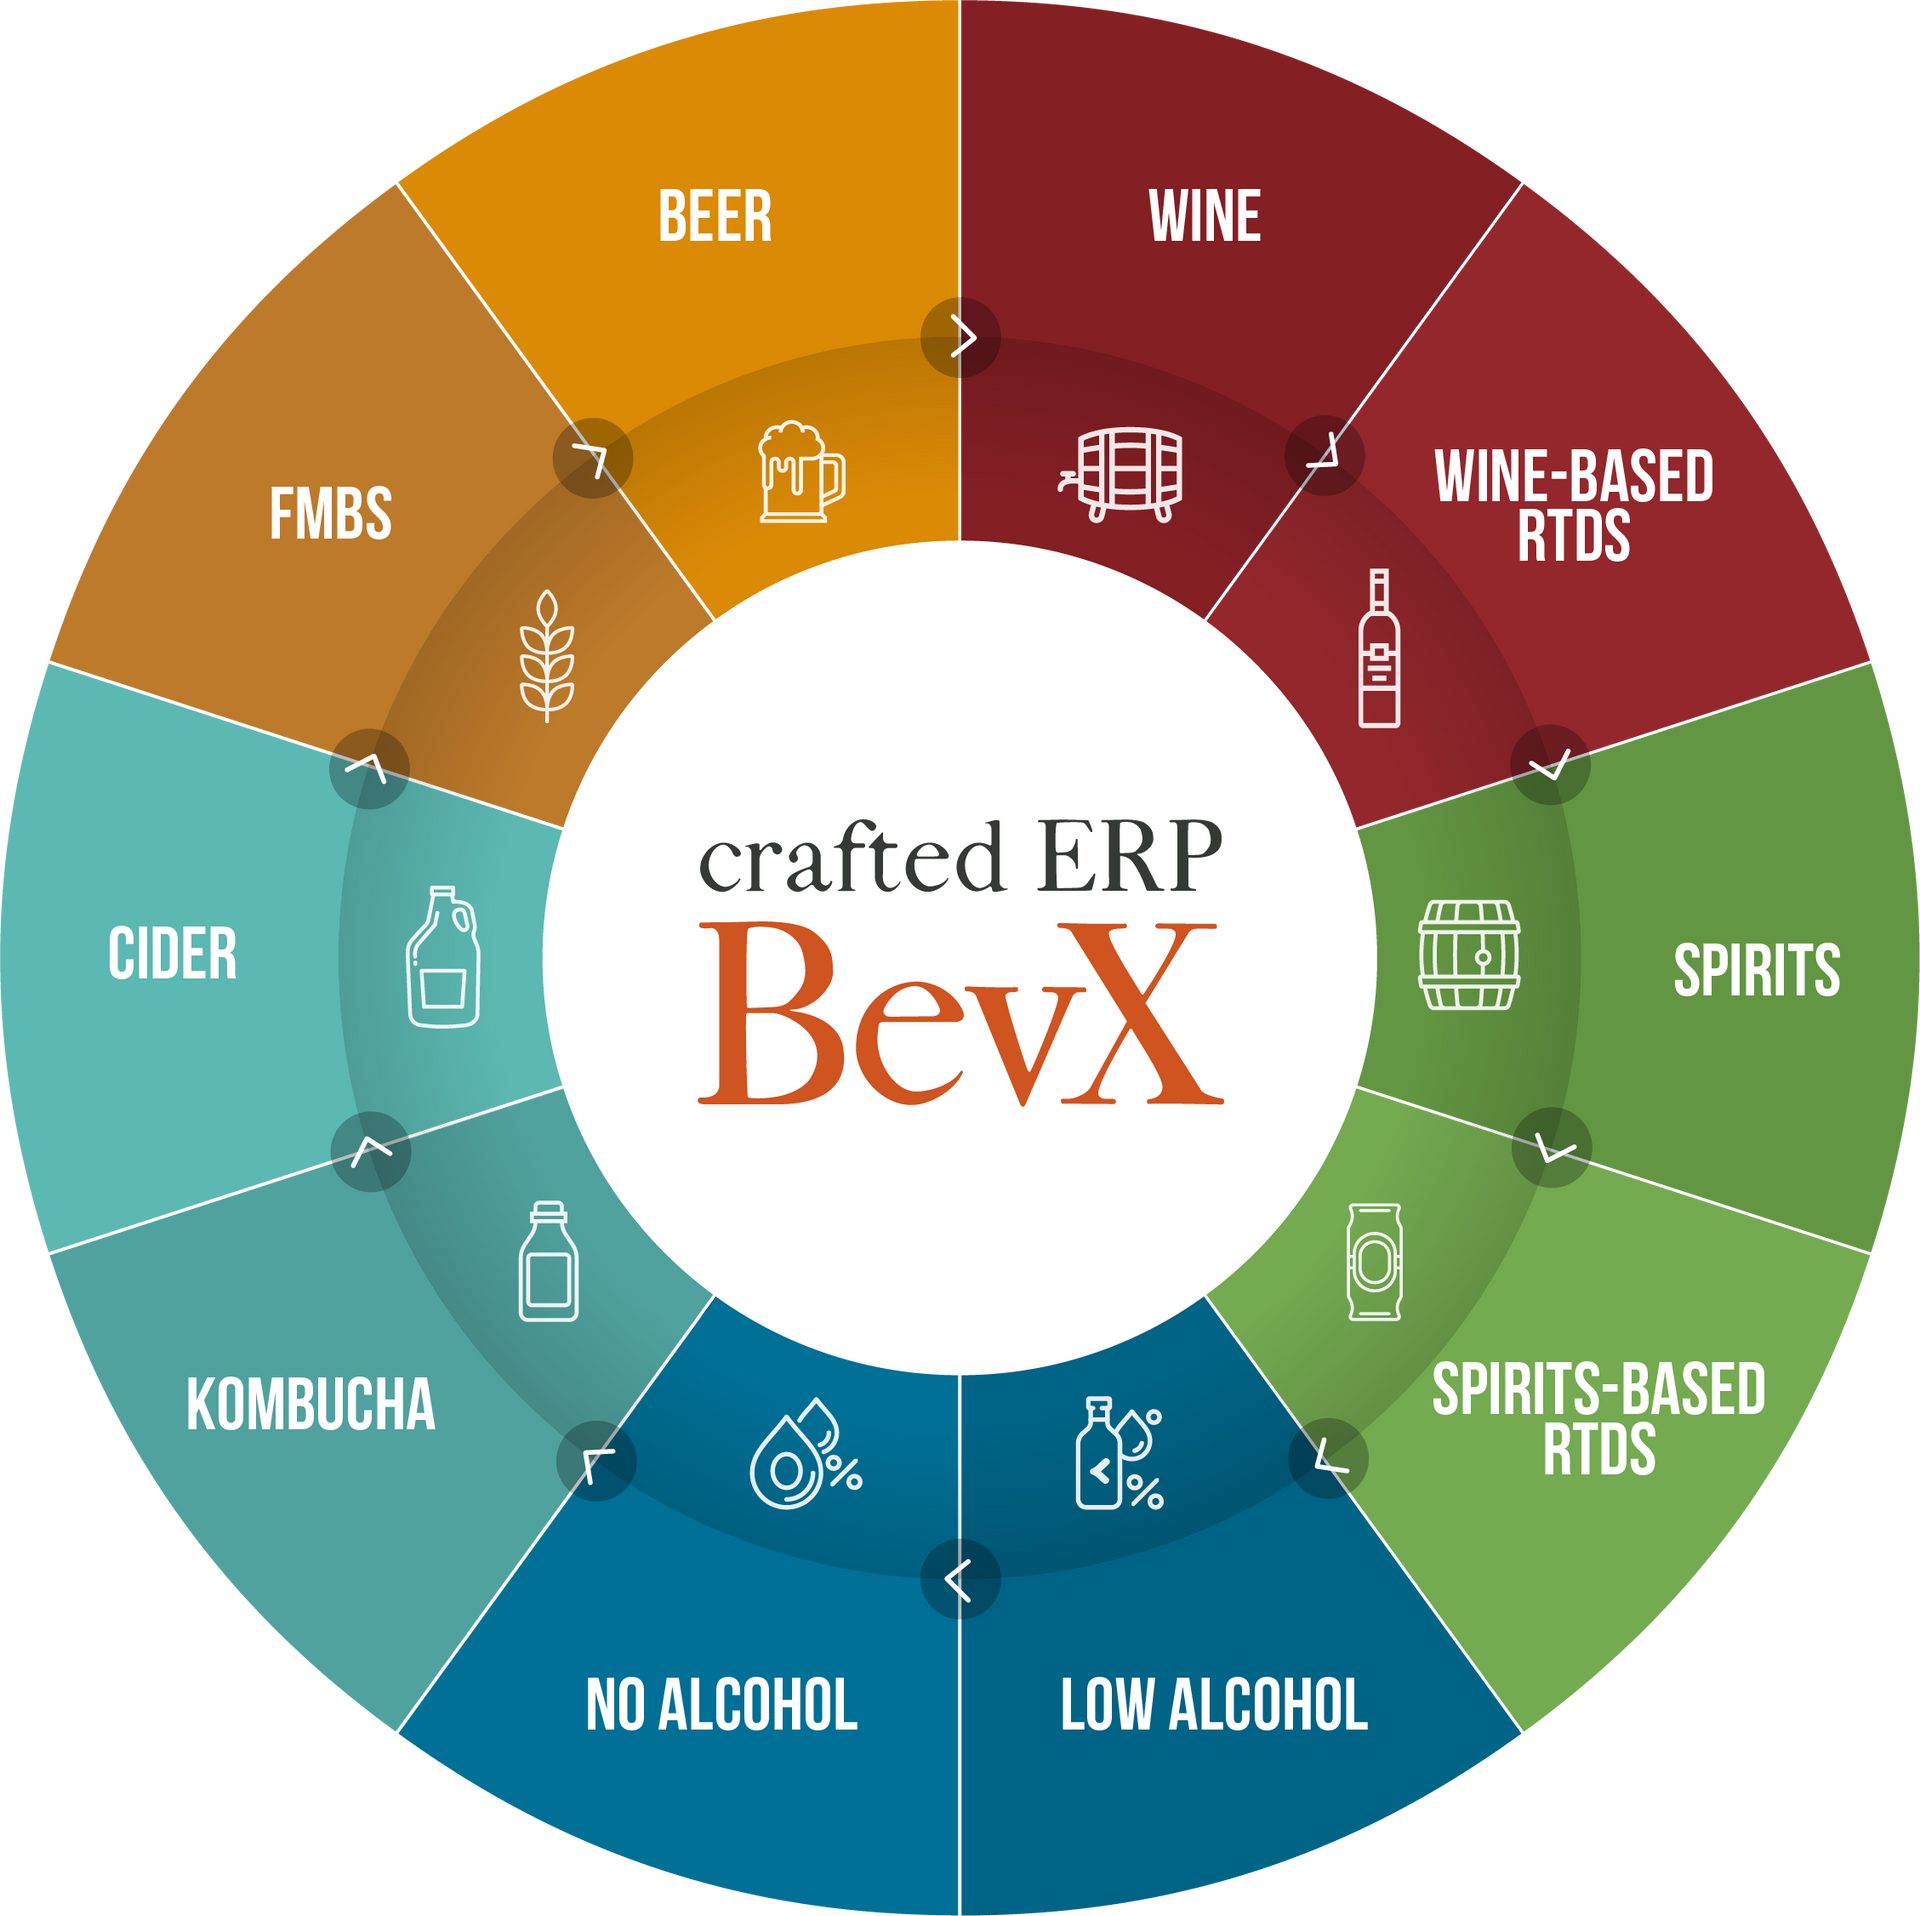 Crafted ERP BevX Multi-category Software Wheel